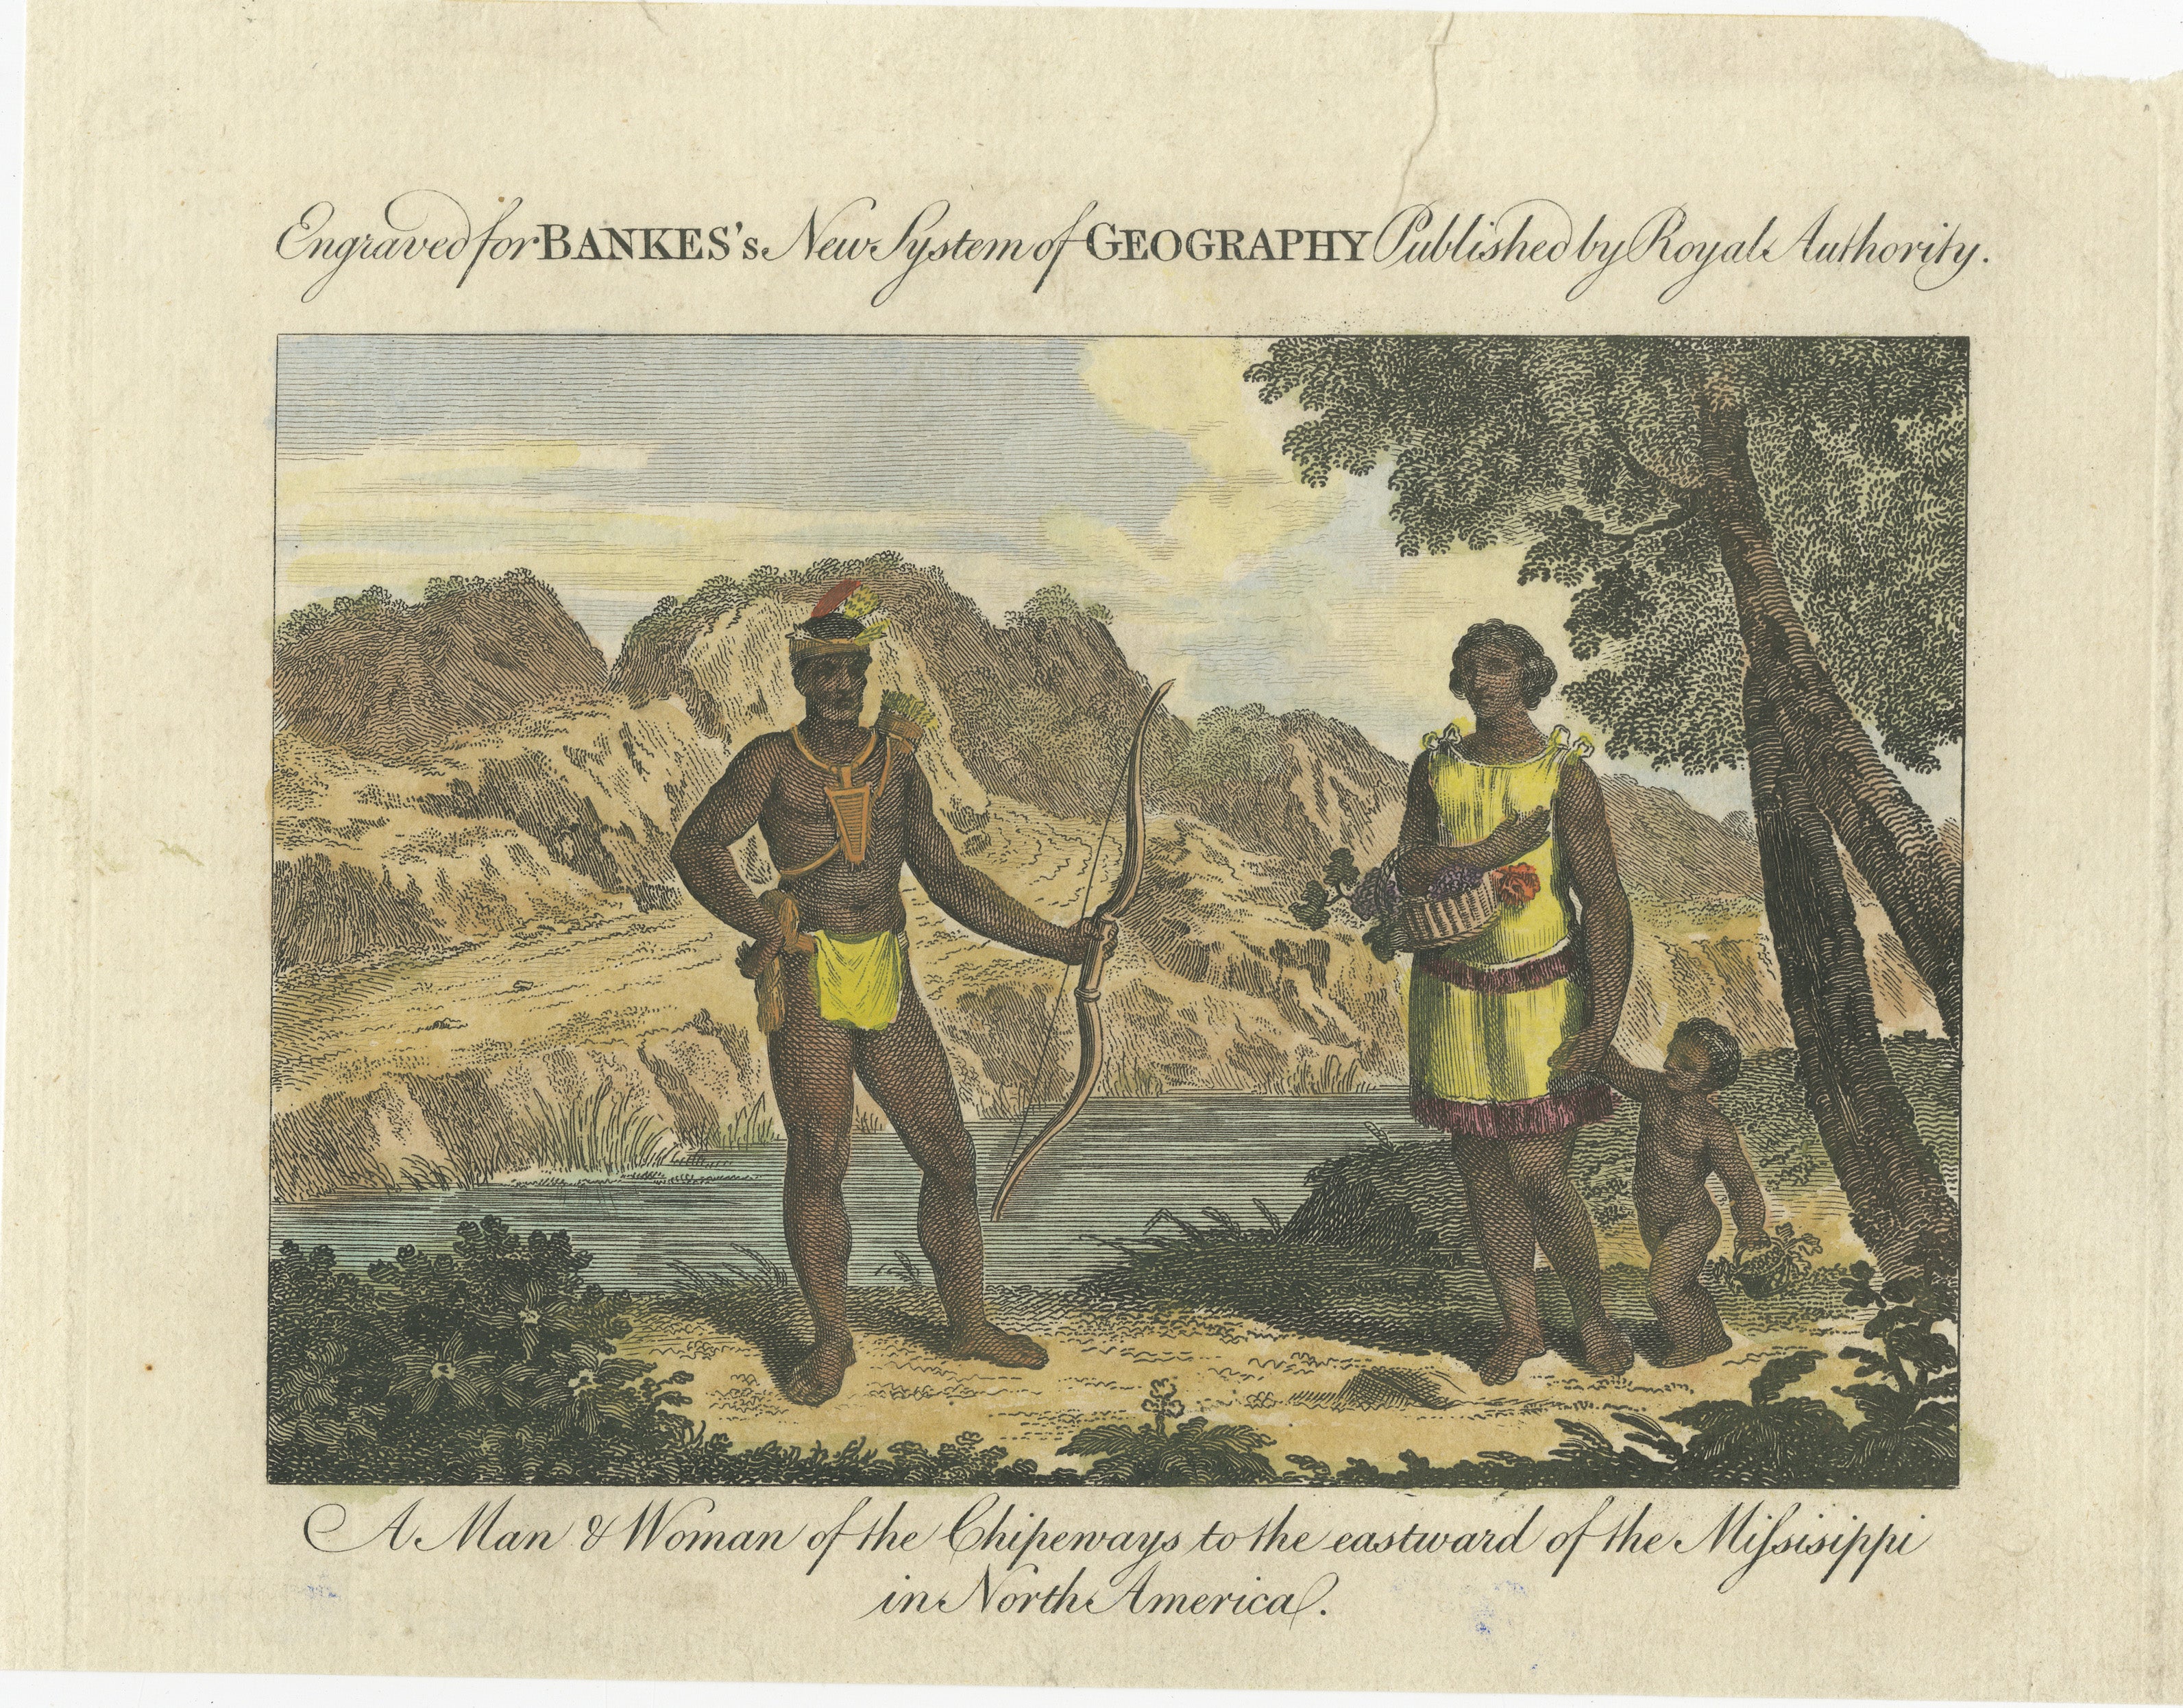 Original antique and hand-colored engraving of people of the Chippewa tribe in American.

The upper part of the print says, 